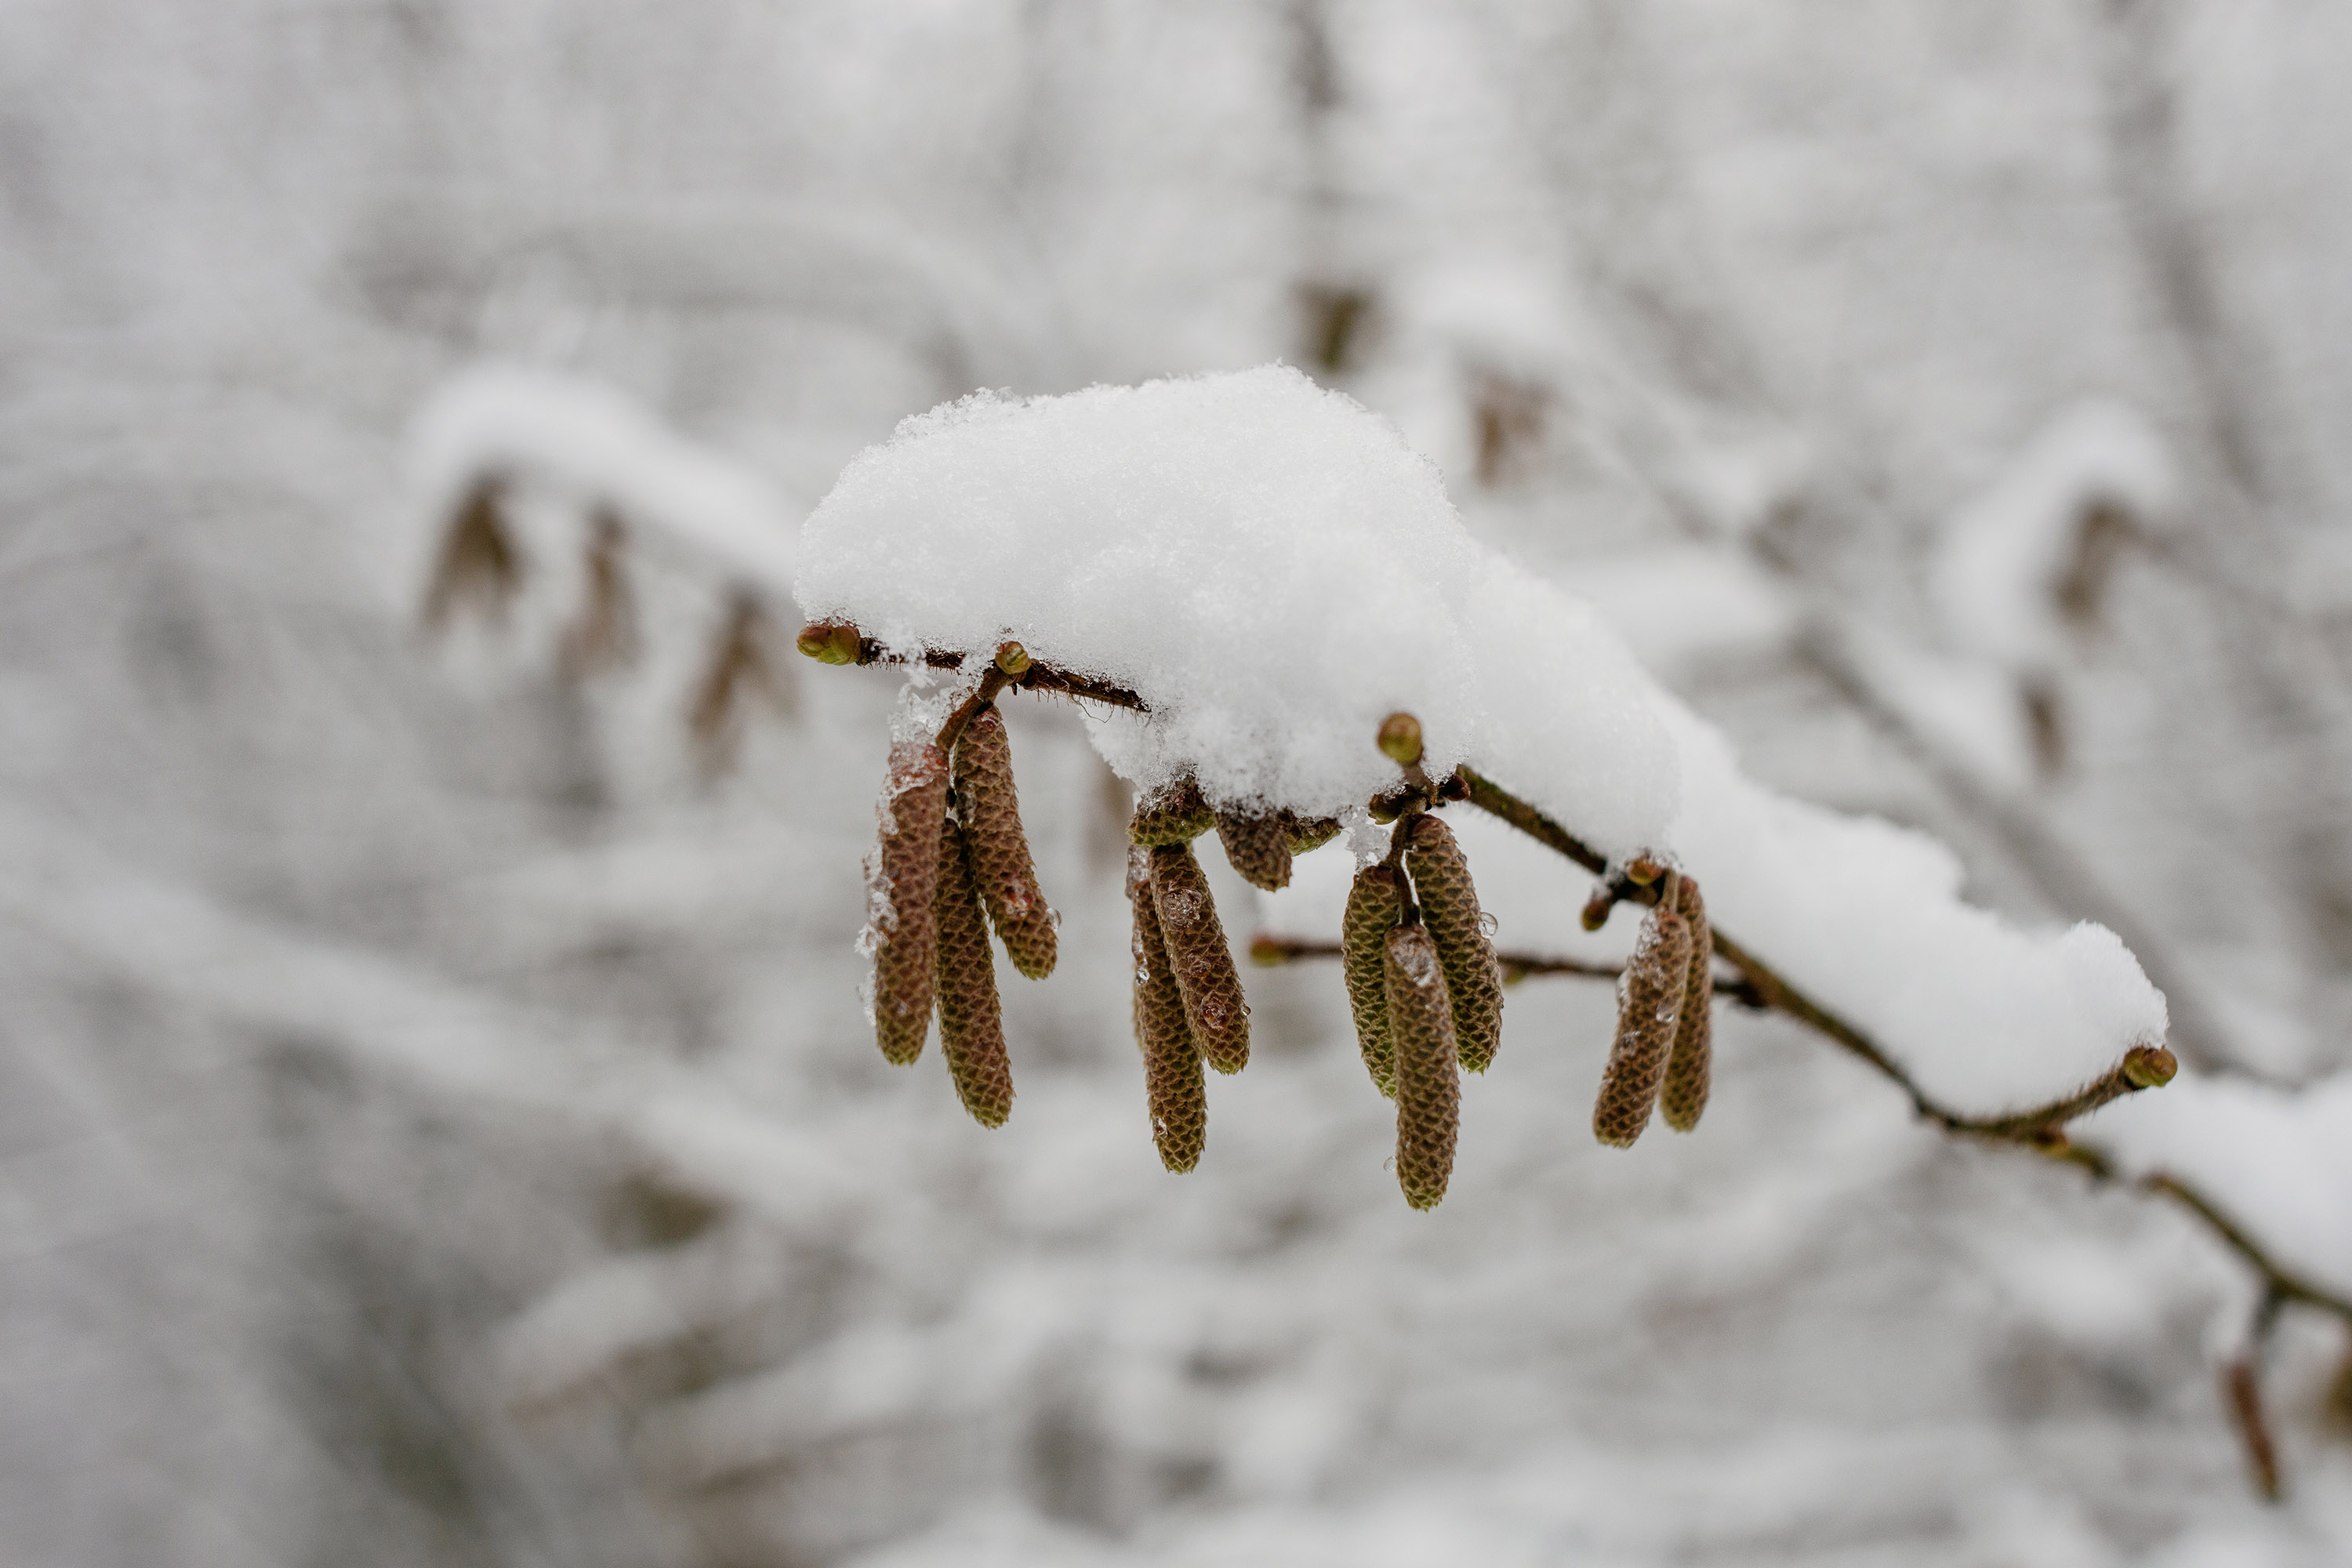 Snow and buds - Shot slightly stopped down